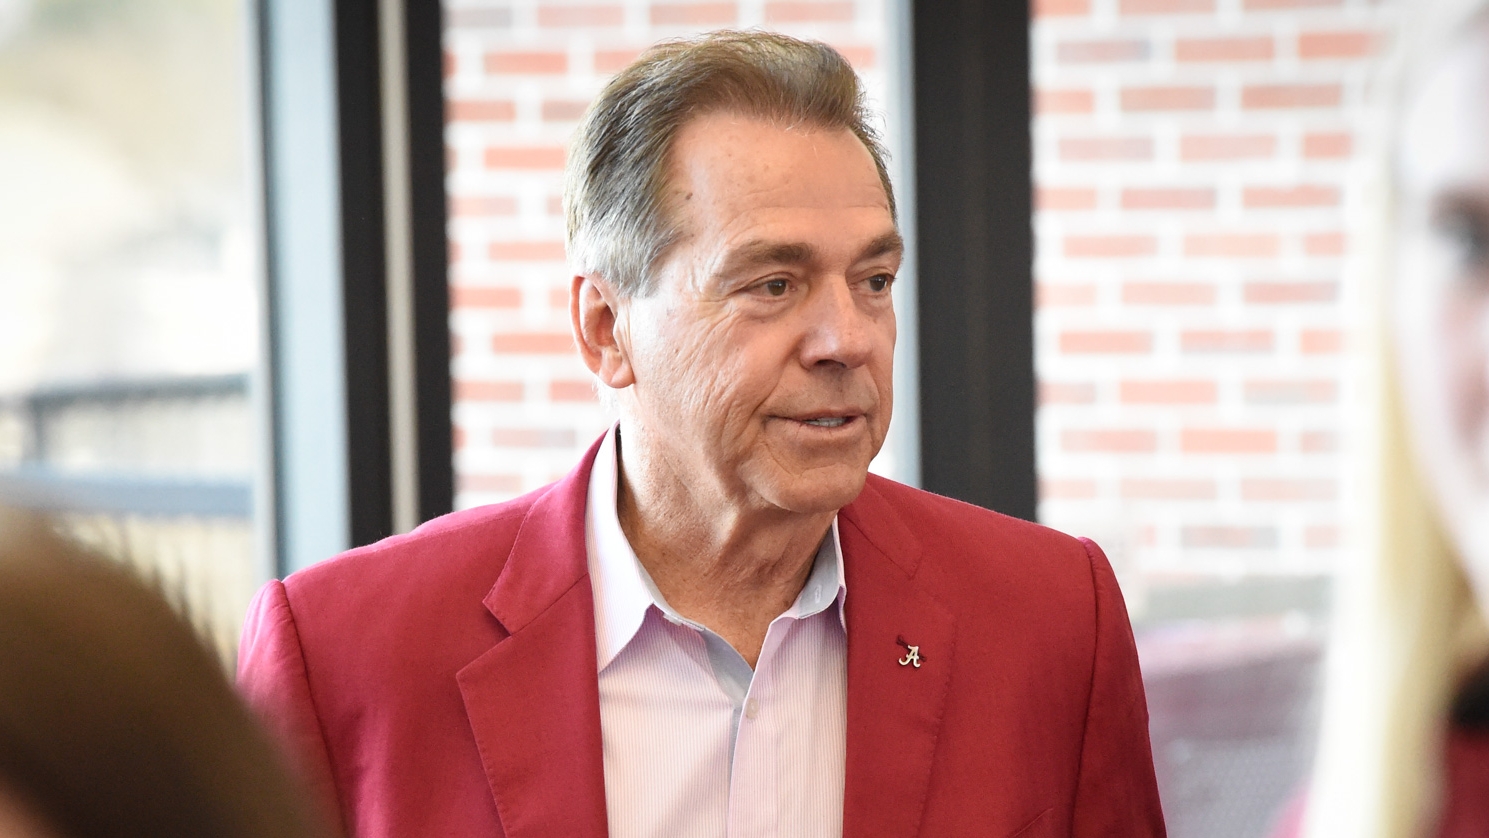 Retired Nick Saban explains what he “misses most” about coaching